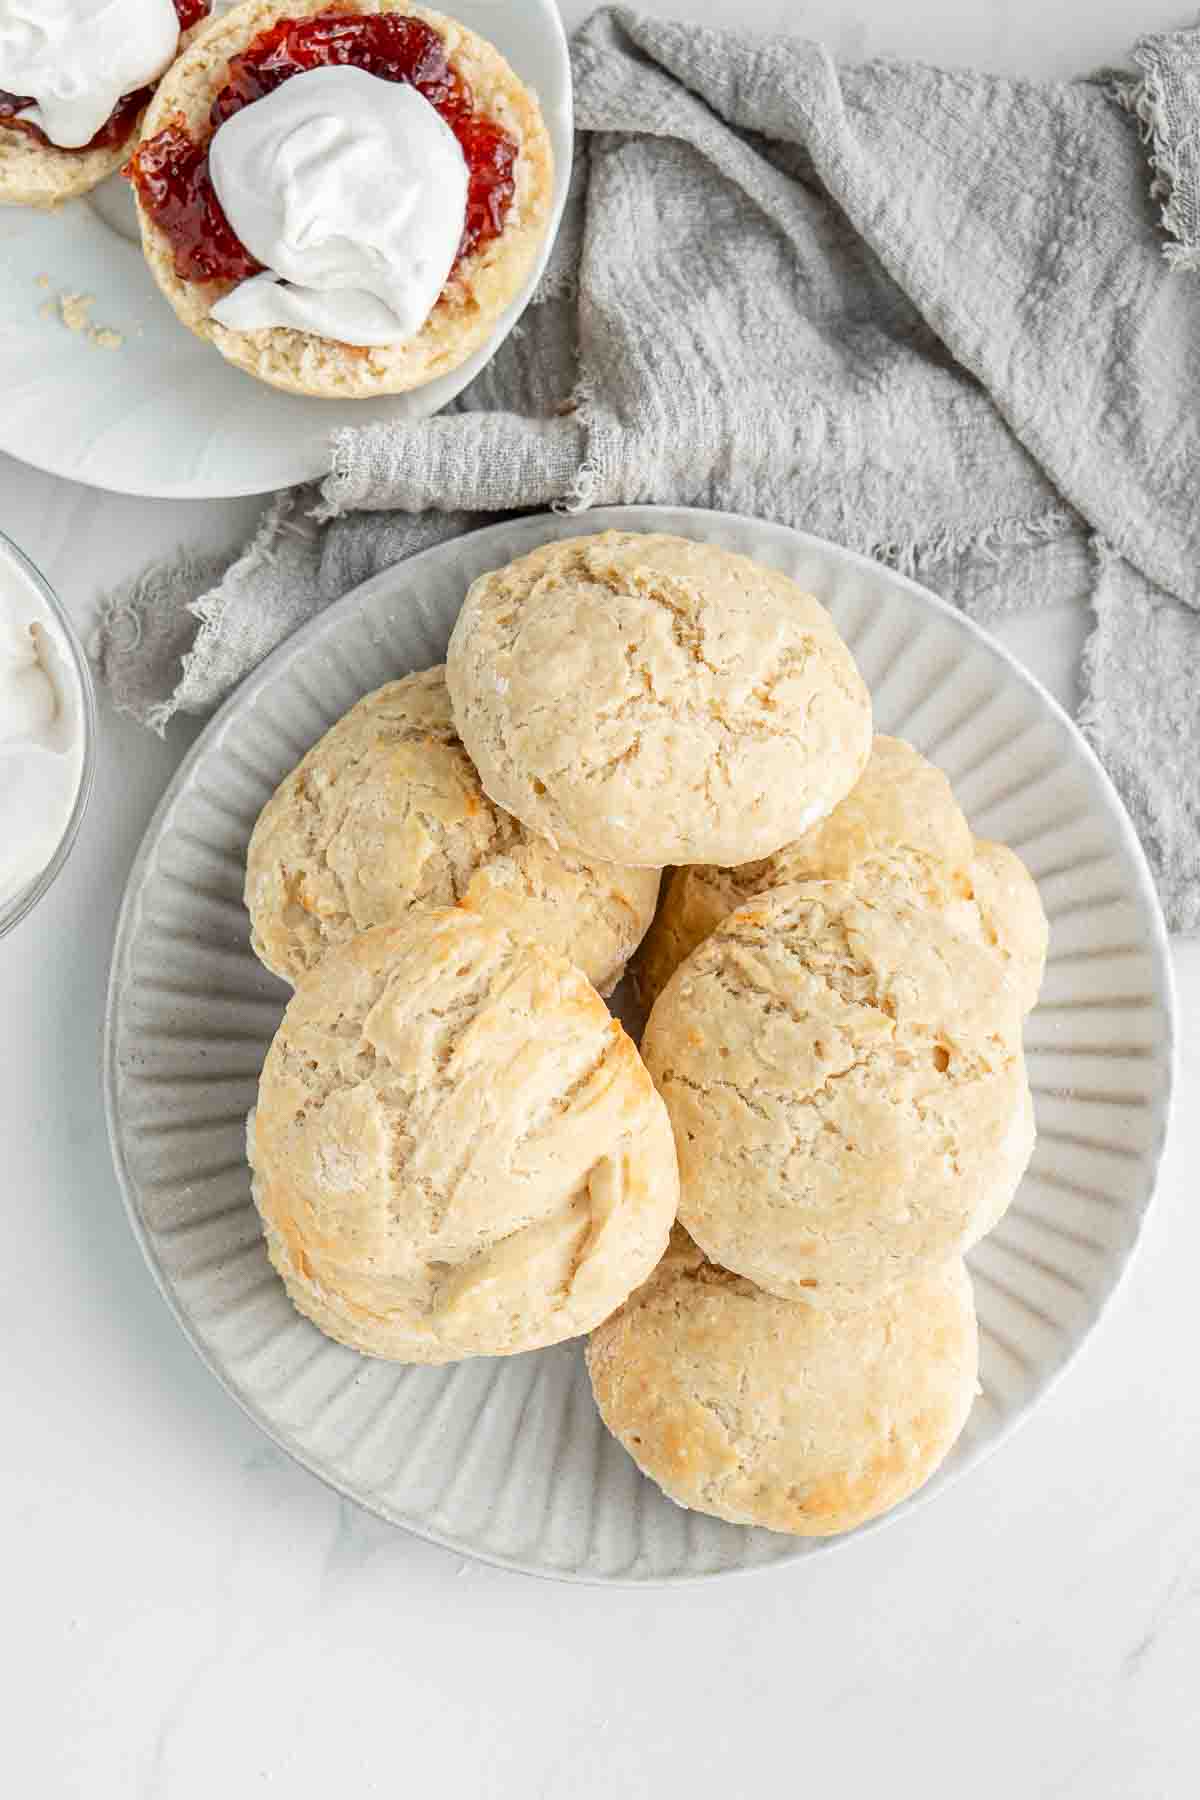 A pile of freshly baked scones on a white plate.